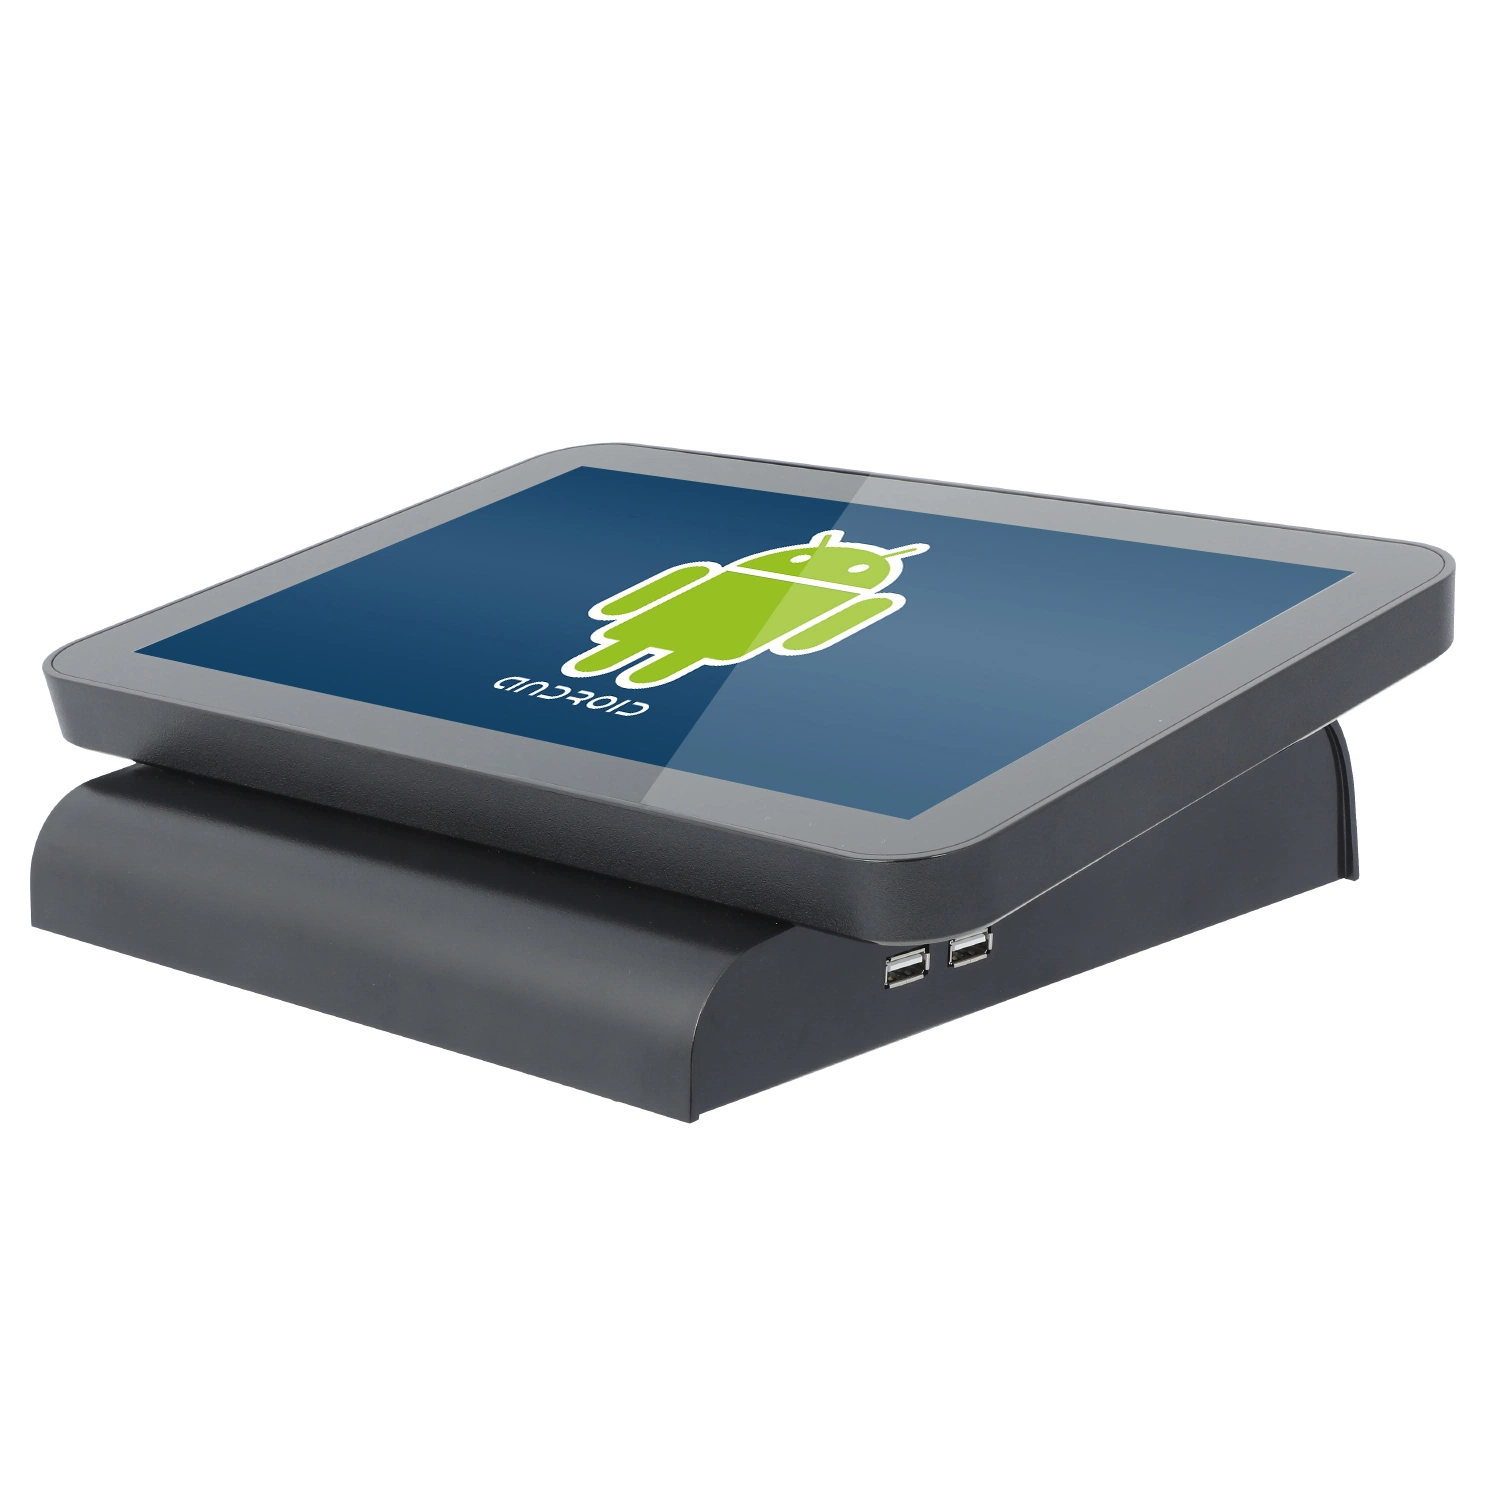 Restaurant Android POS System Business Point of Sale